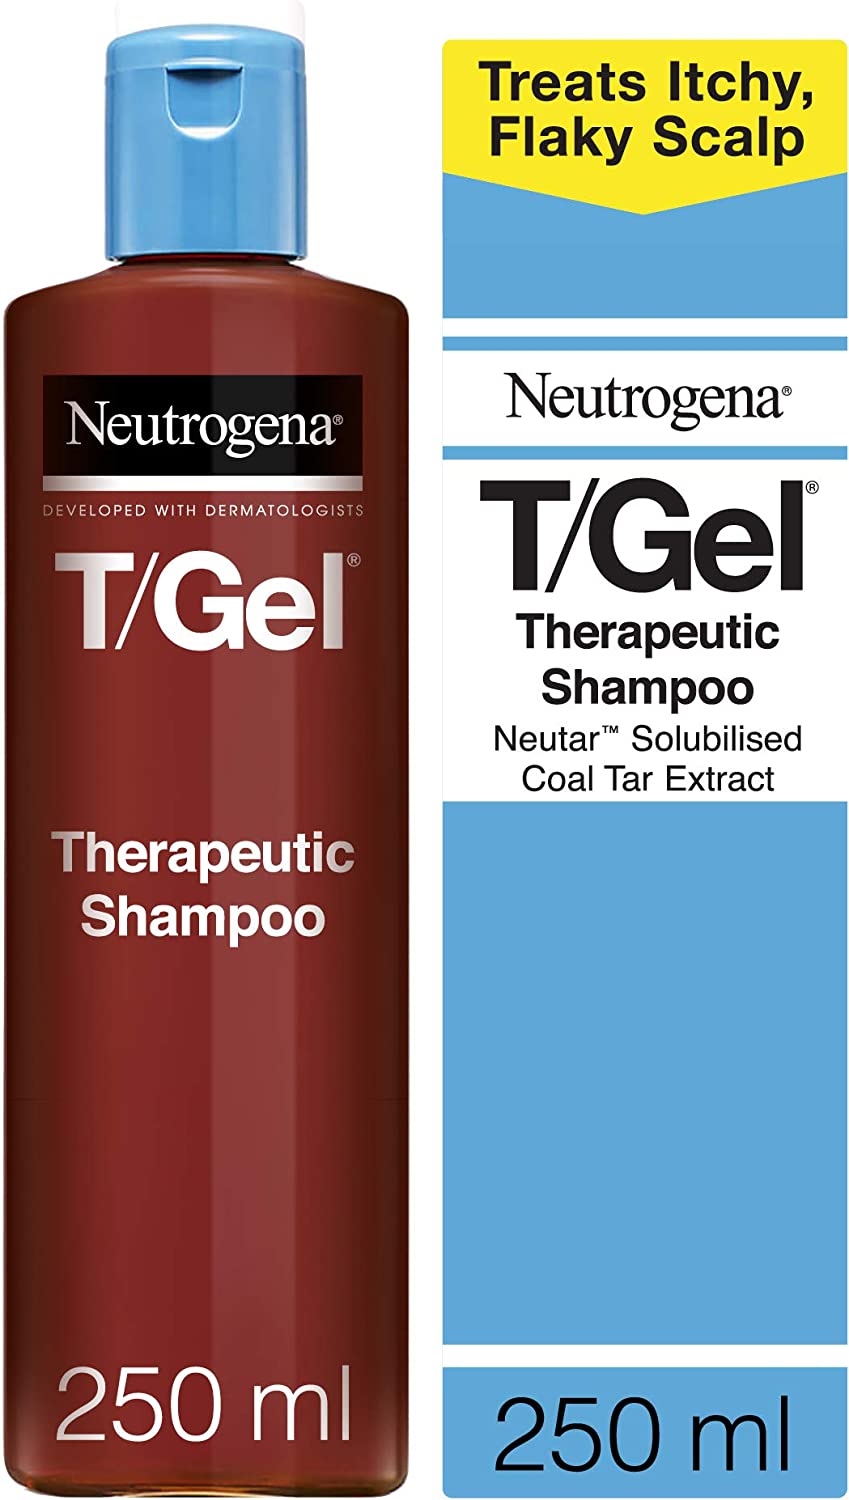 Image of Neutrogena T/Gel Therapeutic Shampoo Treatment for Scalp Psoriasis, Itching Scalp and Dandruff 250 ml